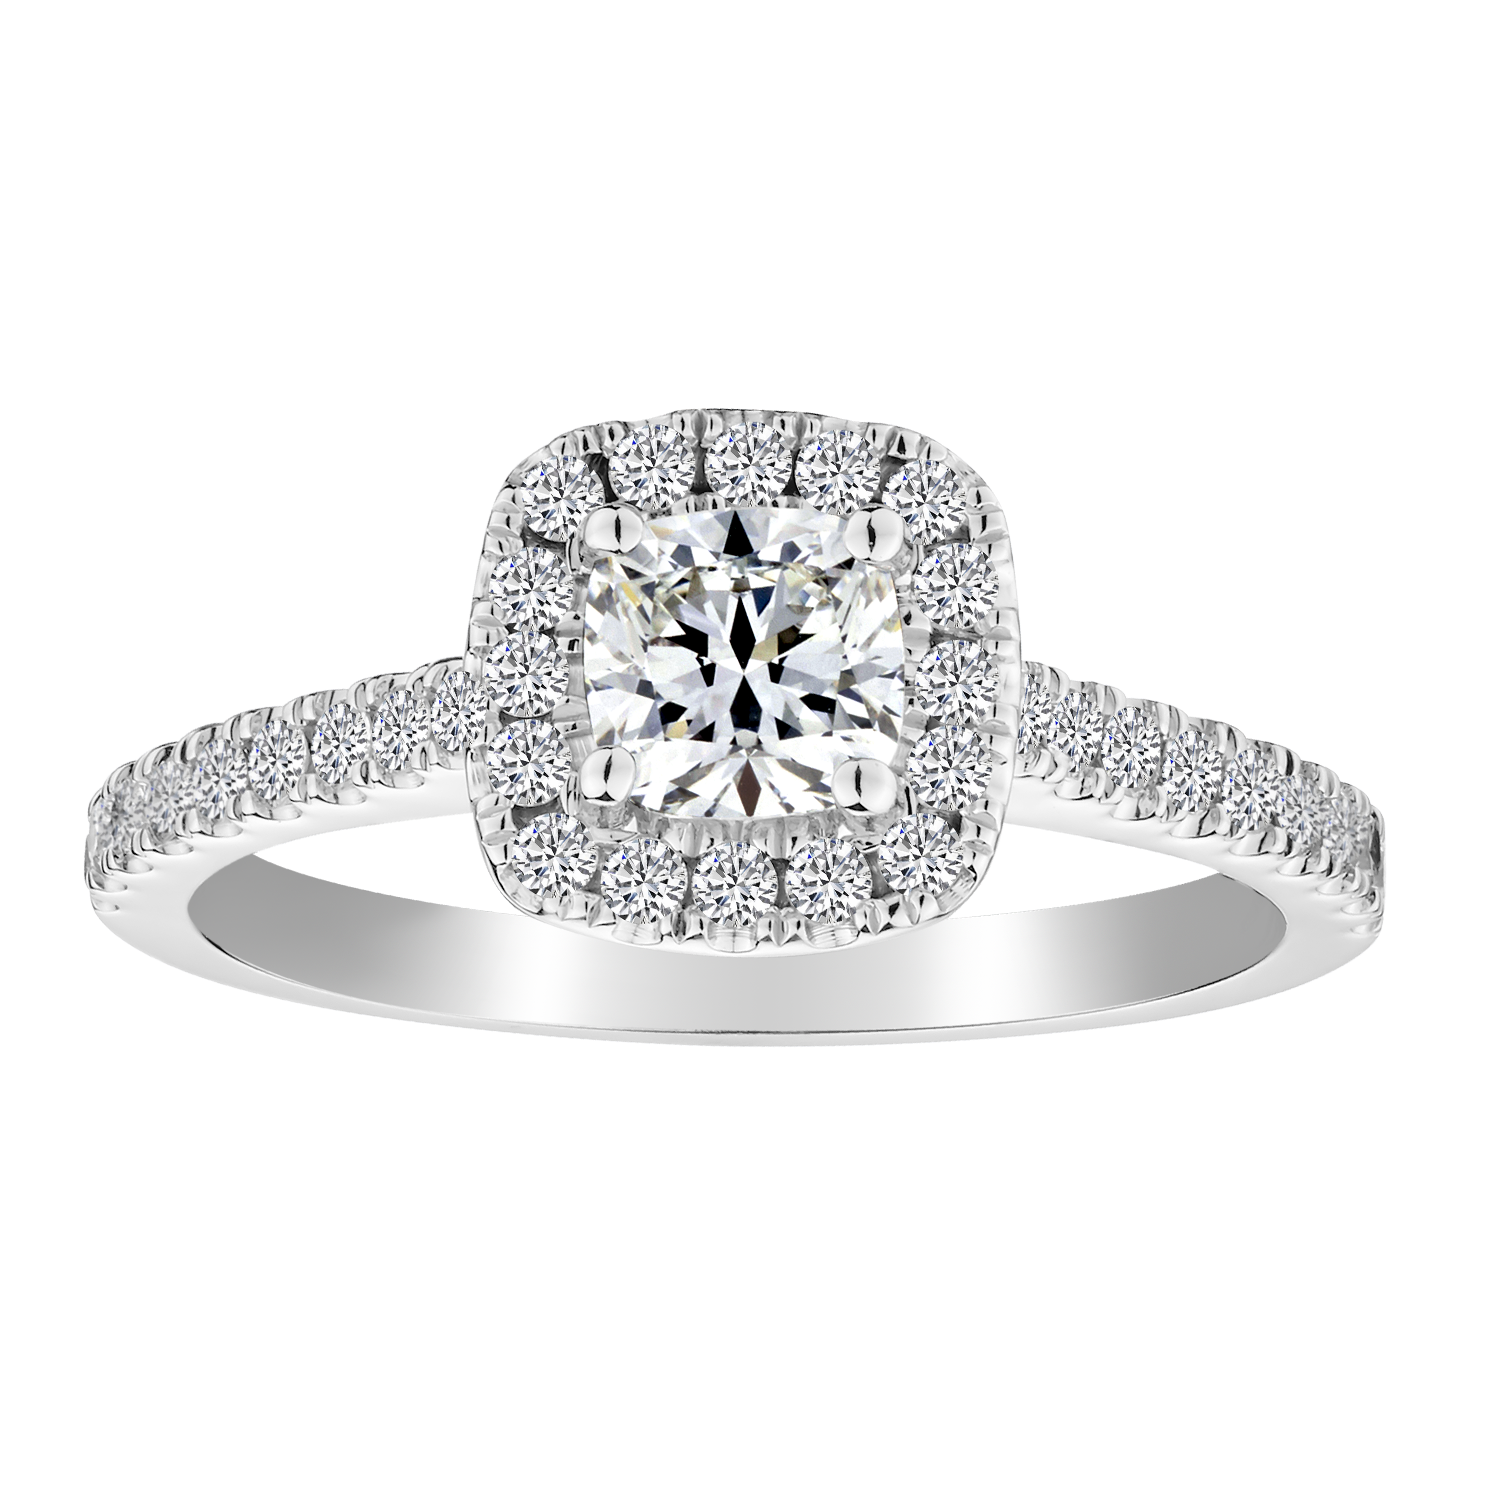 .80 Total Diamond Weight Engagement Ring, 14kt White Gold......................NOW